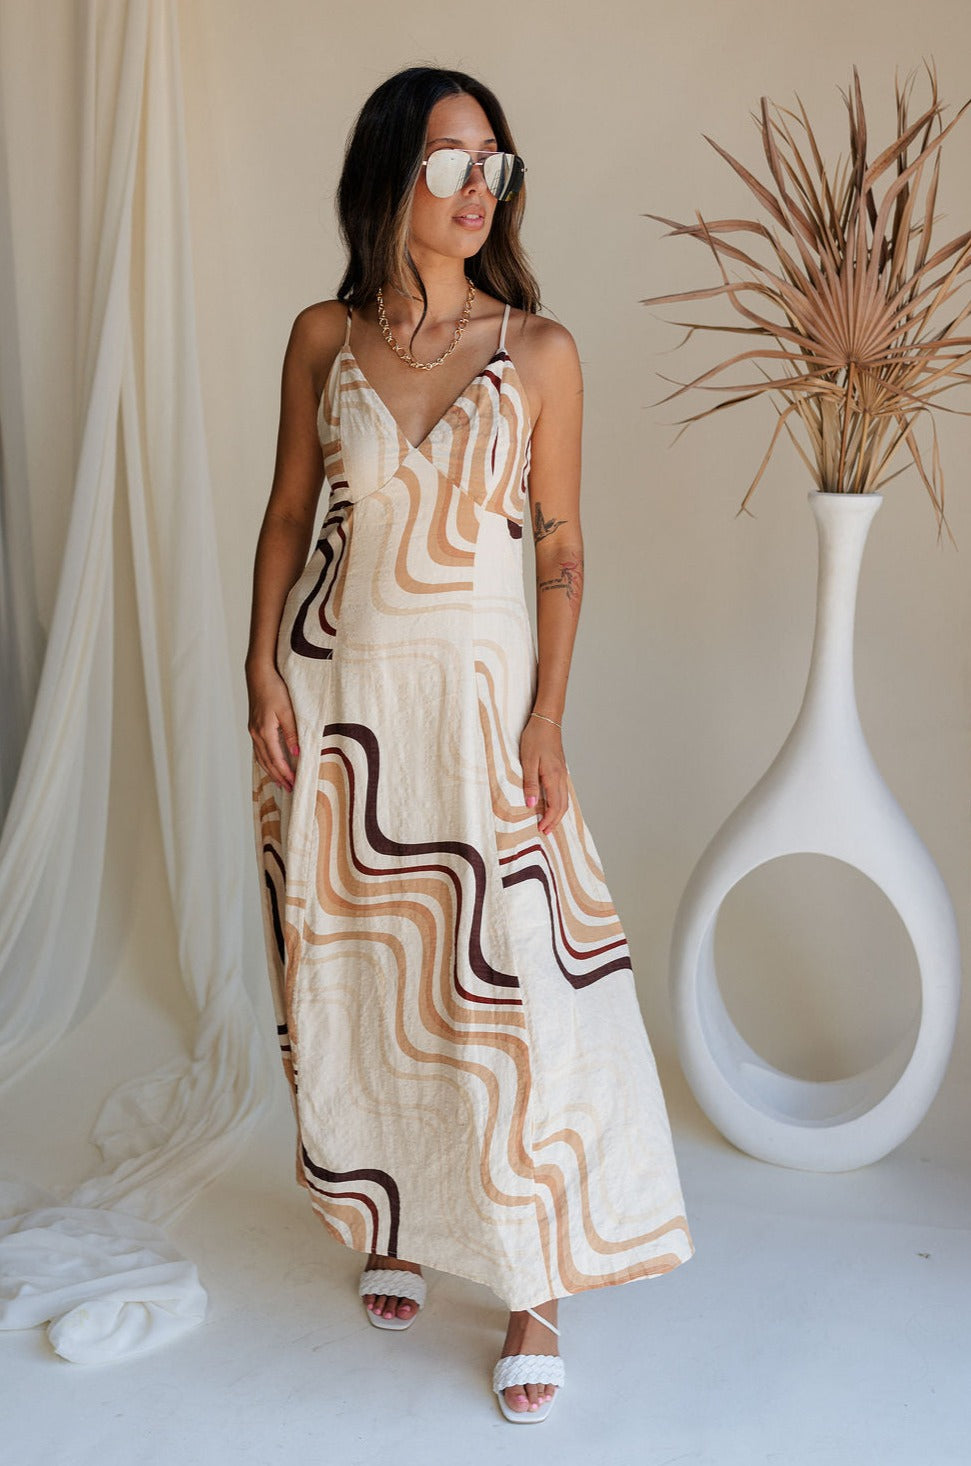 Full body front view of female model wearing the Wren Neutral Swirl Print Maxi Dress that has cream fabric with a taupe and brown swirl print, a v neck, and an open back with ties.